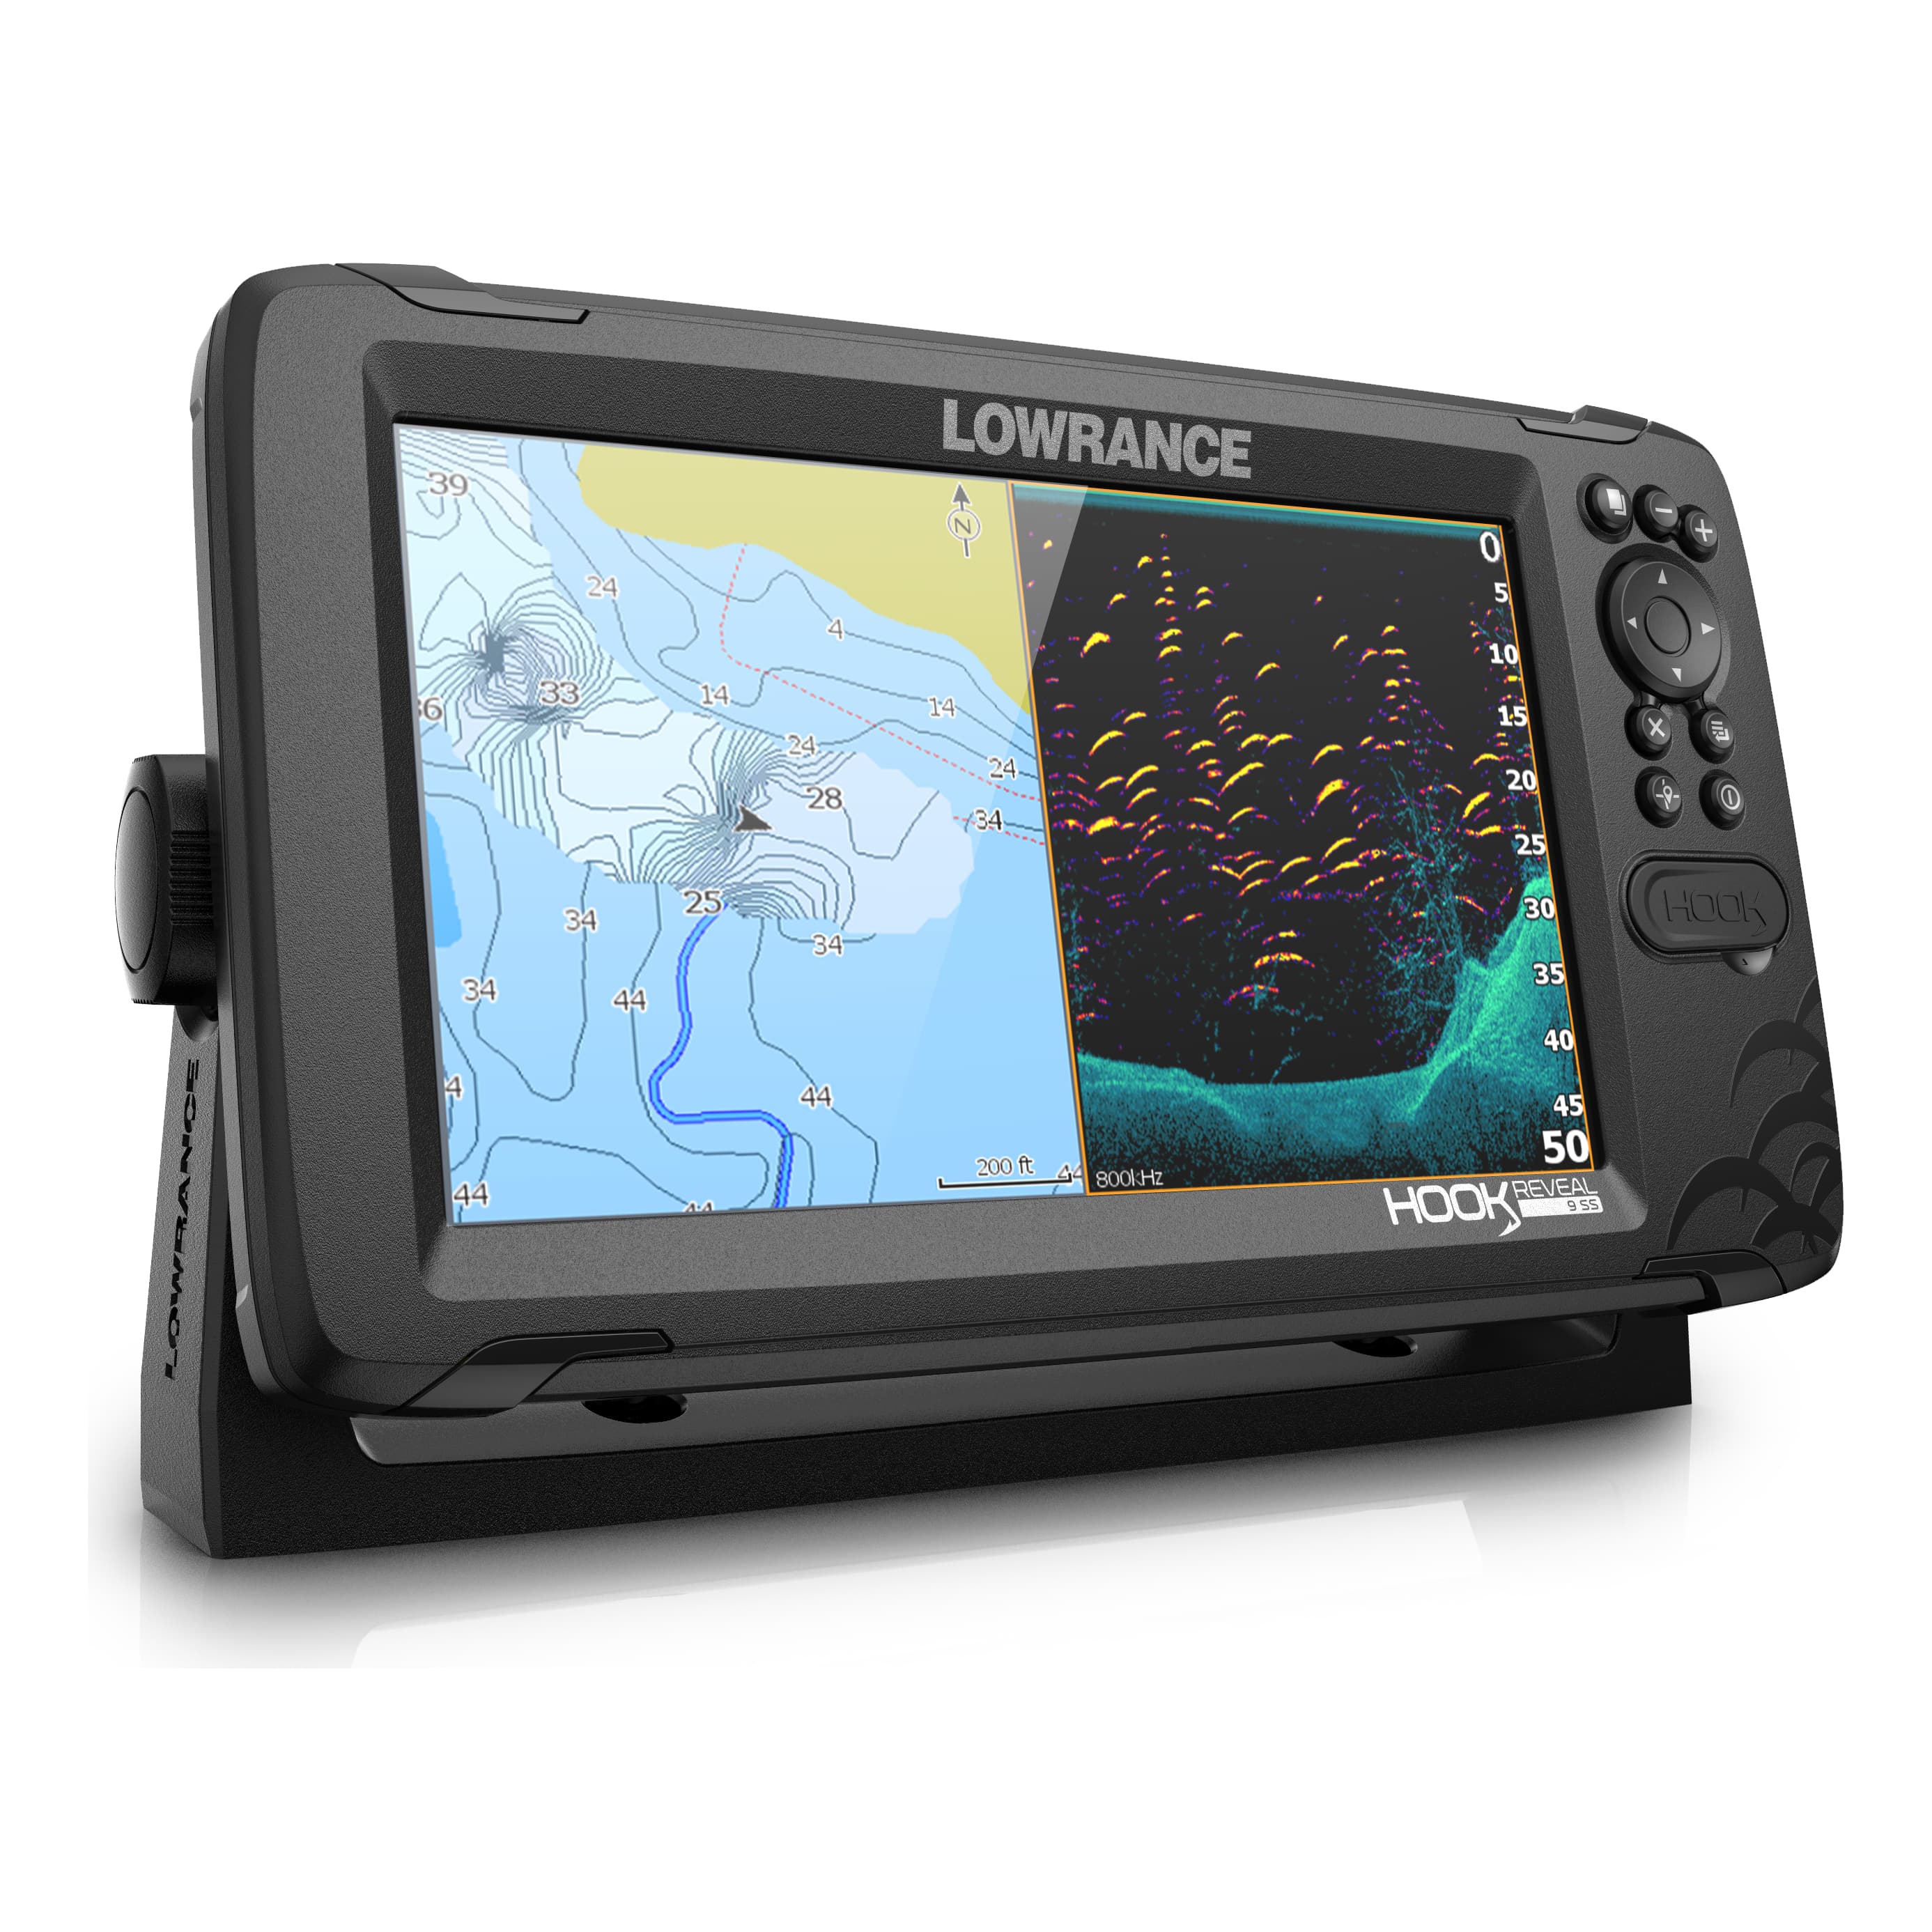 New Hook2 by Lowrance enables SonarChart™ Live and Advanced Map